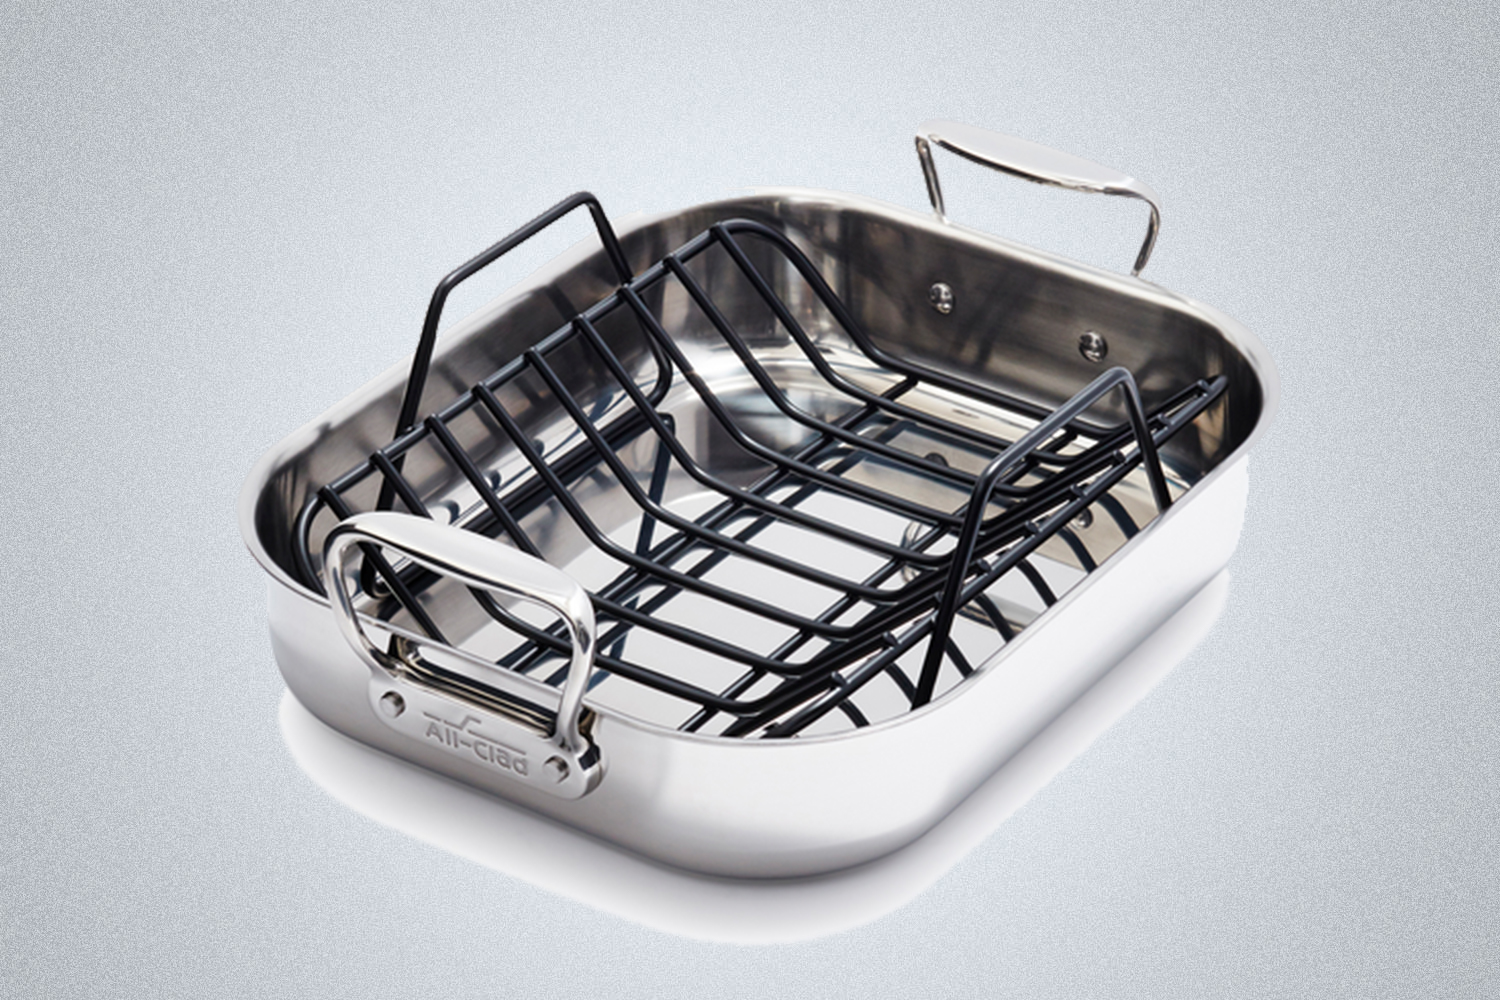 All-Clad Stainless Steel Roasting Pan With Nonstick Rack